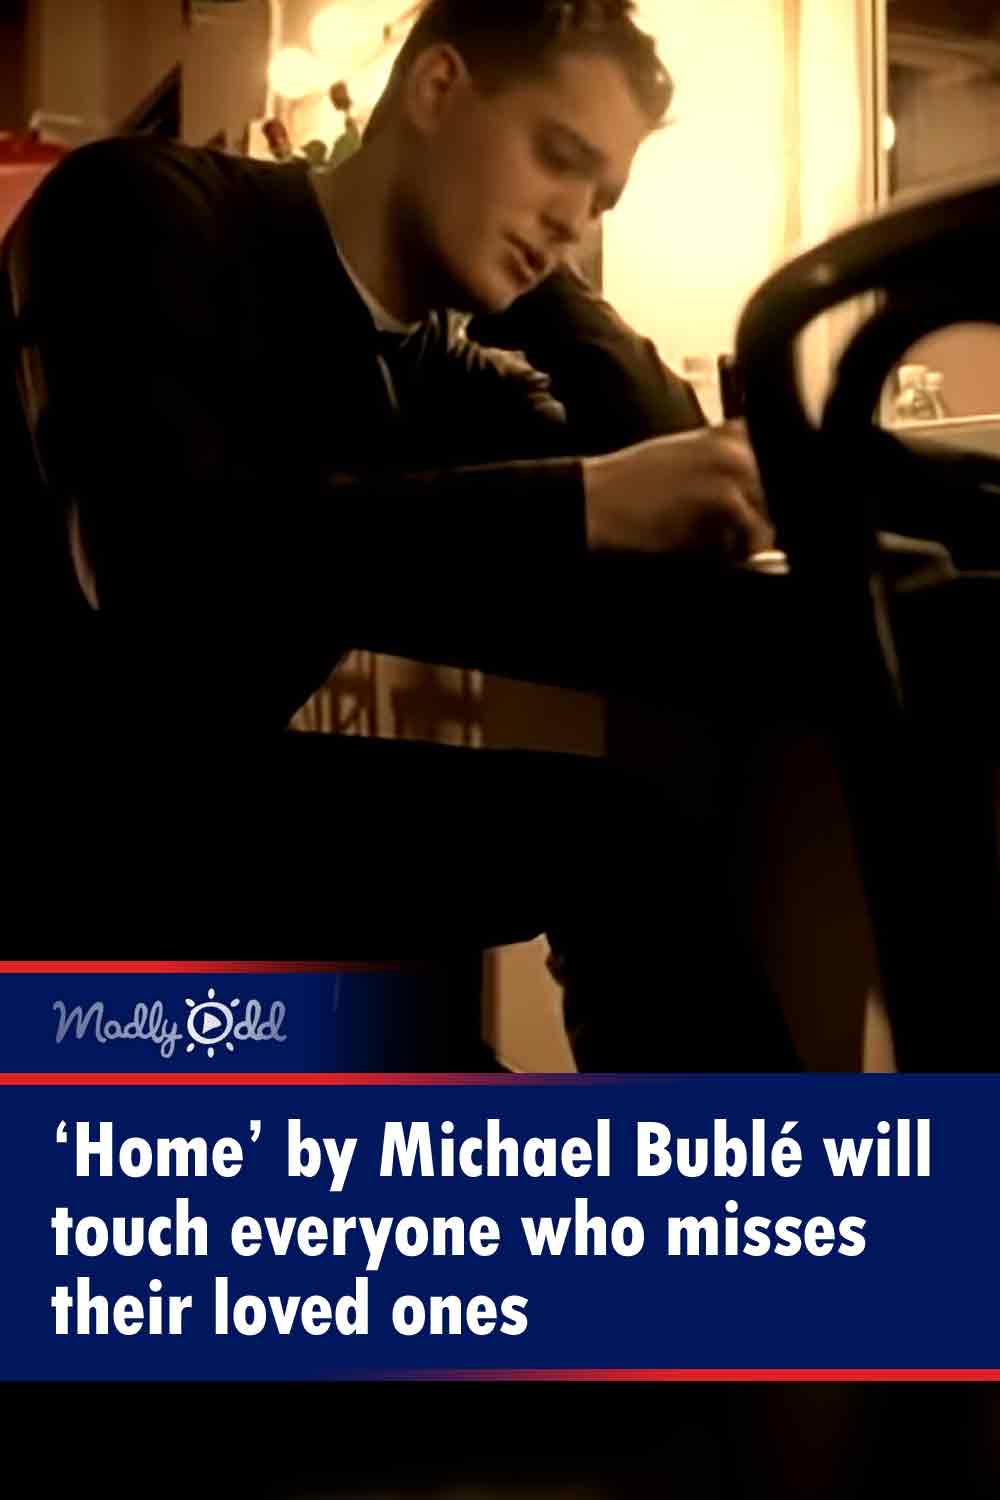 ‘Home’ by Michael Bublé will touch everyone who misses their loved ones